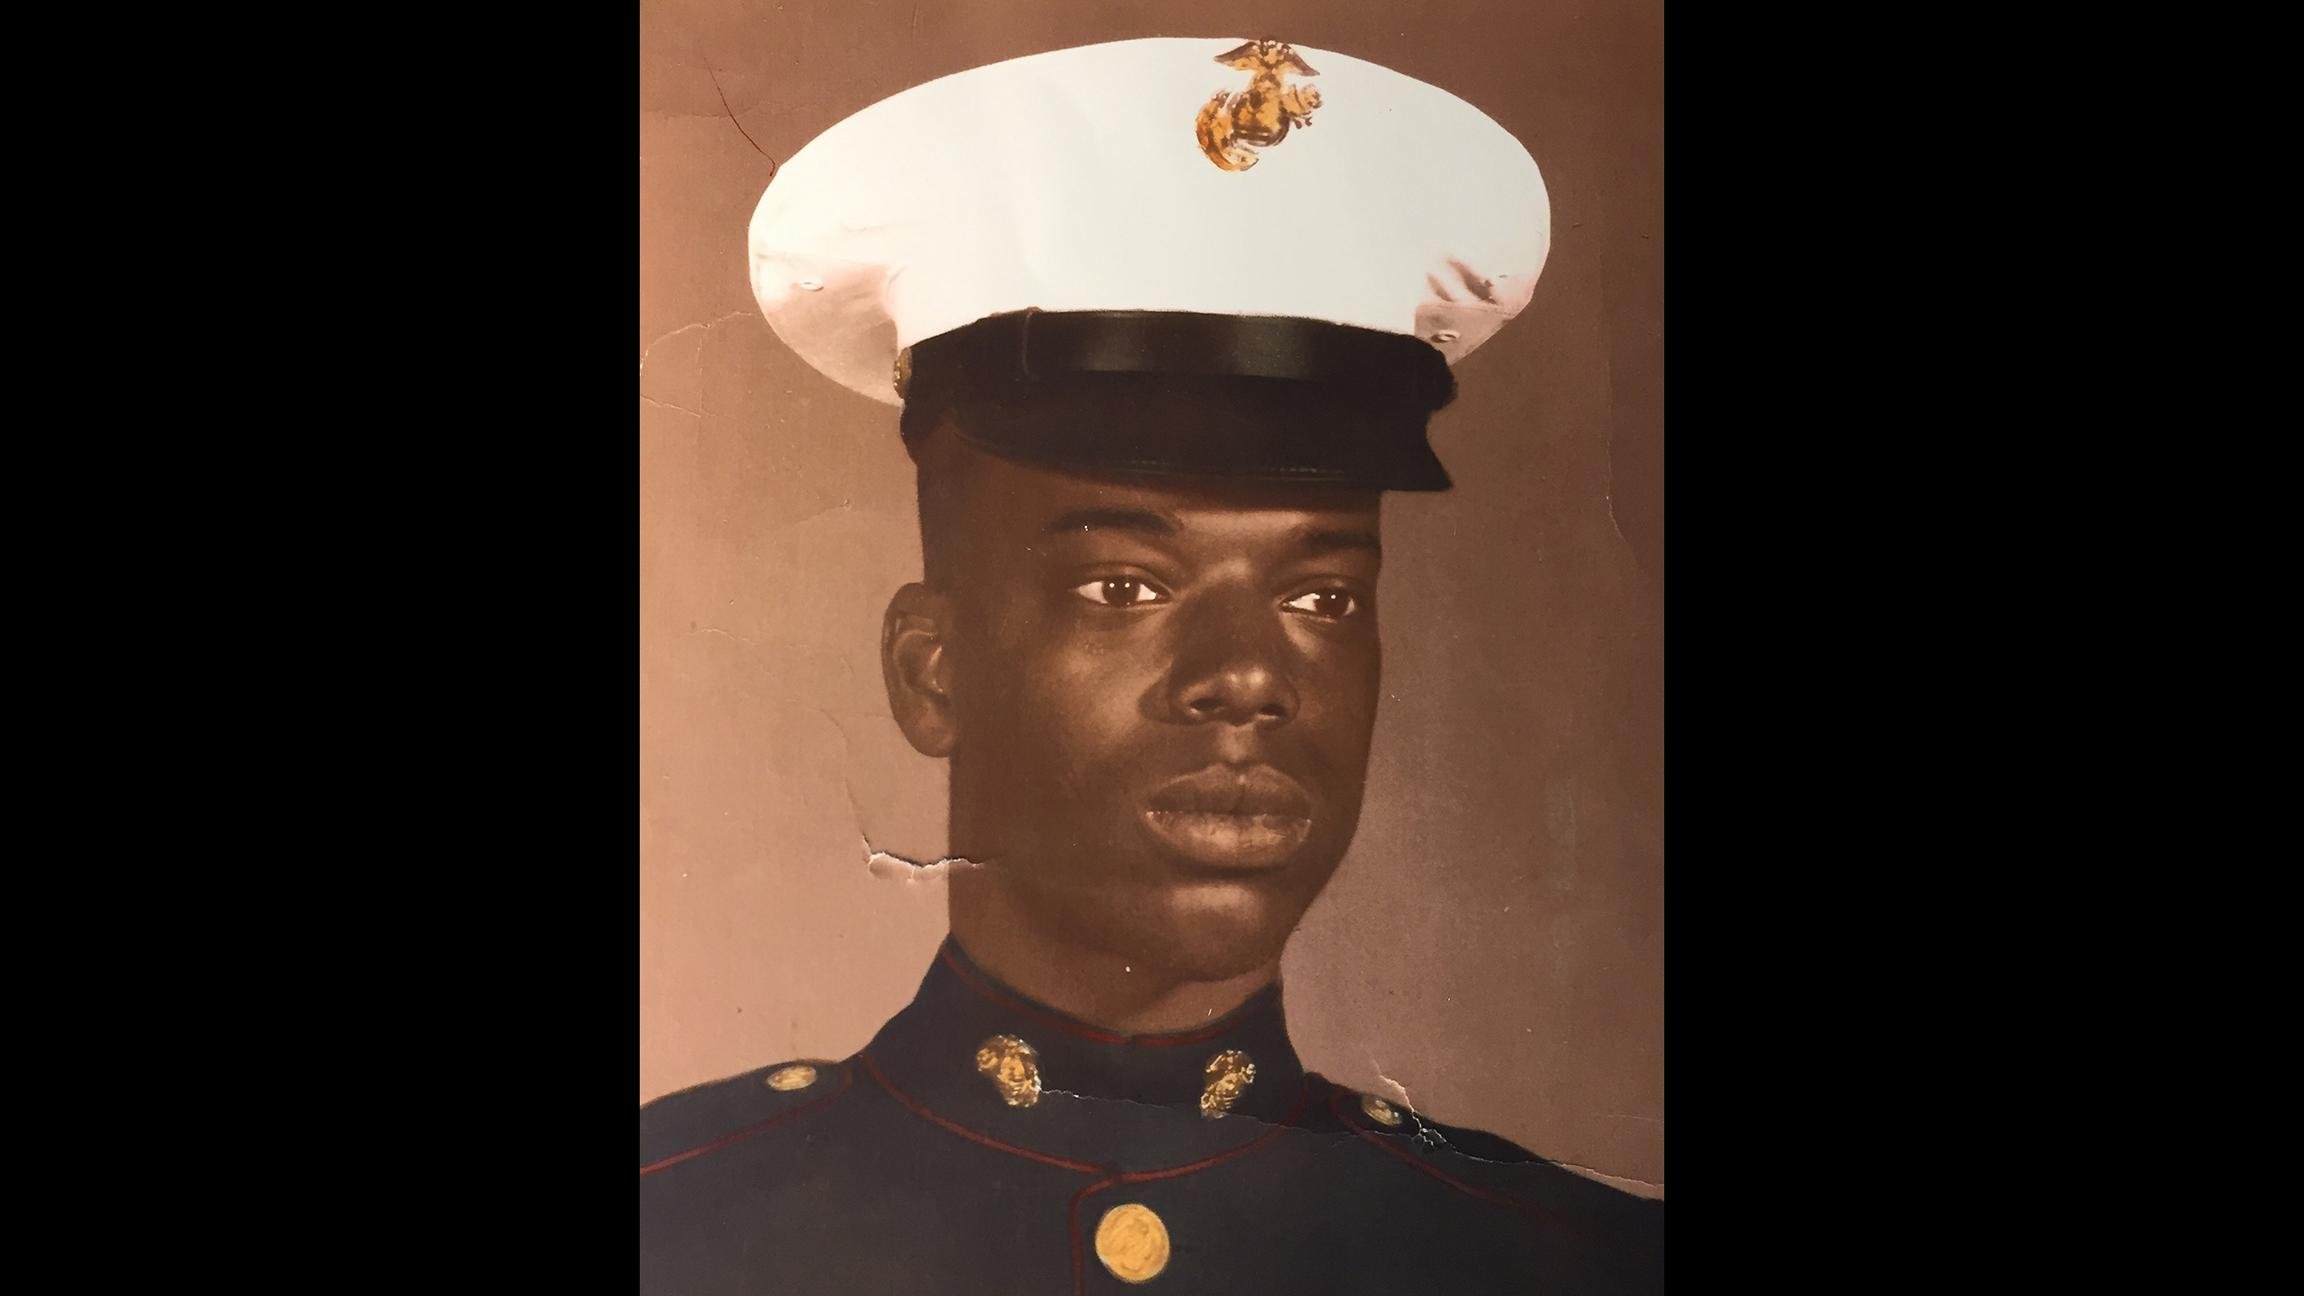 Herschel Embry served in the 3rd Marine Division in South Vietnam near the demilitarized zone. (Courtesy of Herschel Embry)